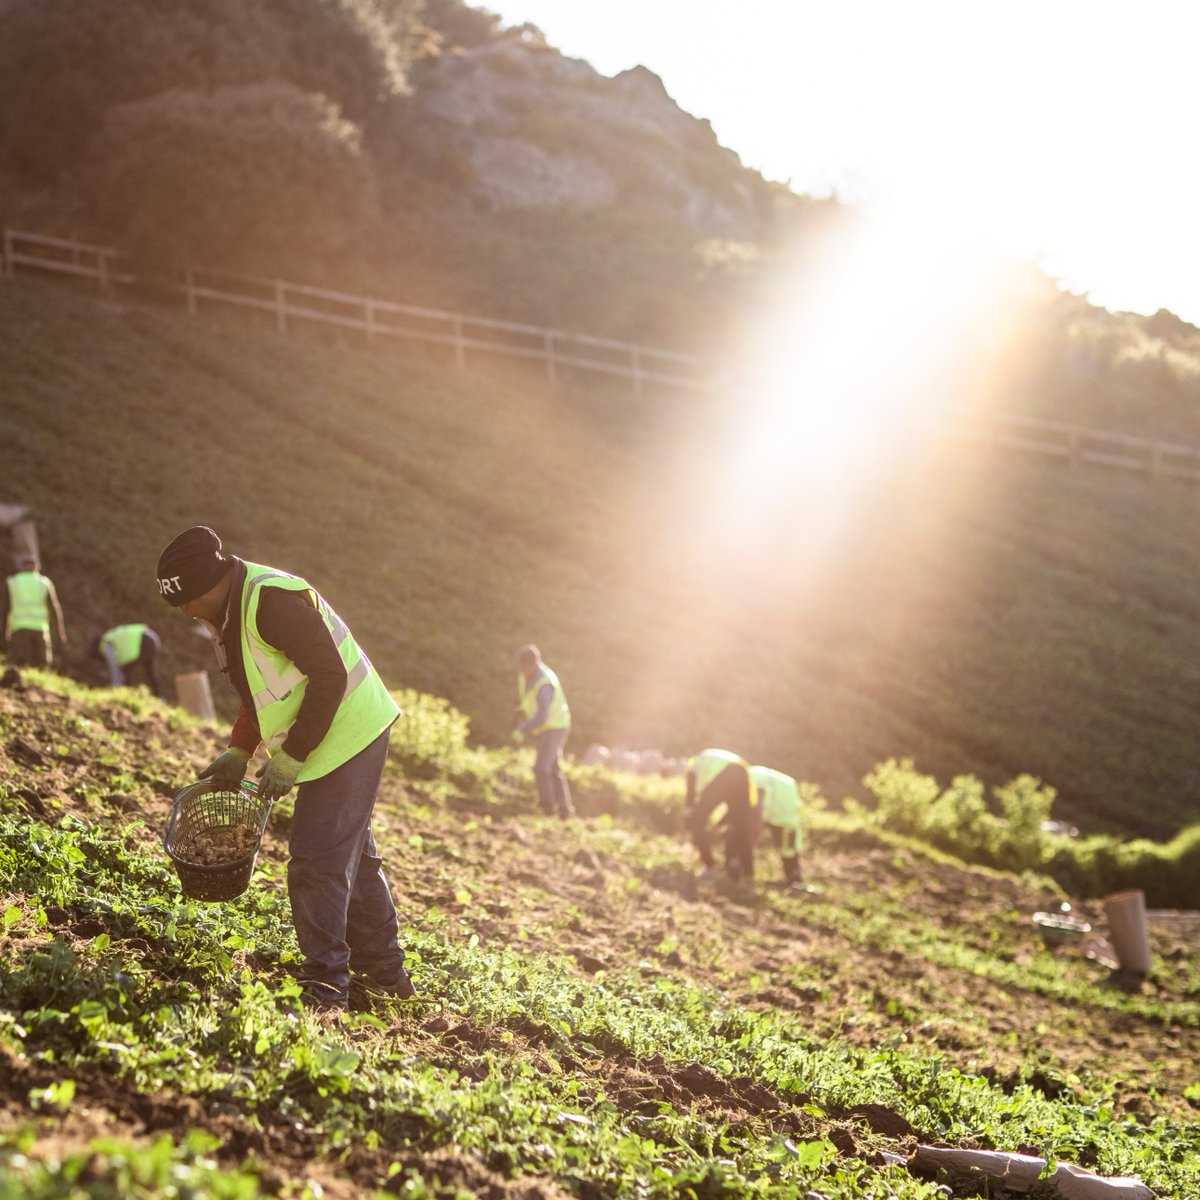 40,000 tonnes of #JerseyRoyals later and the 2023 season is drawing to a close. Our farmers have put in all their hard work to ensure you receive the best crop over the season and what a job well done! #seasonalproduce #simplyseasonal